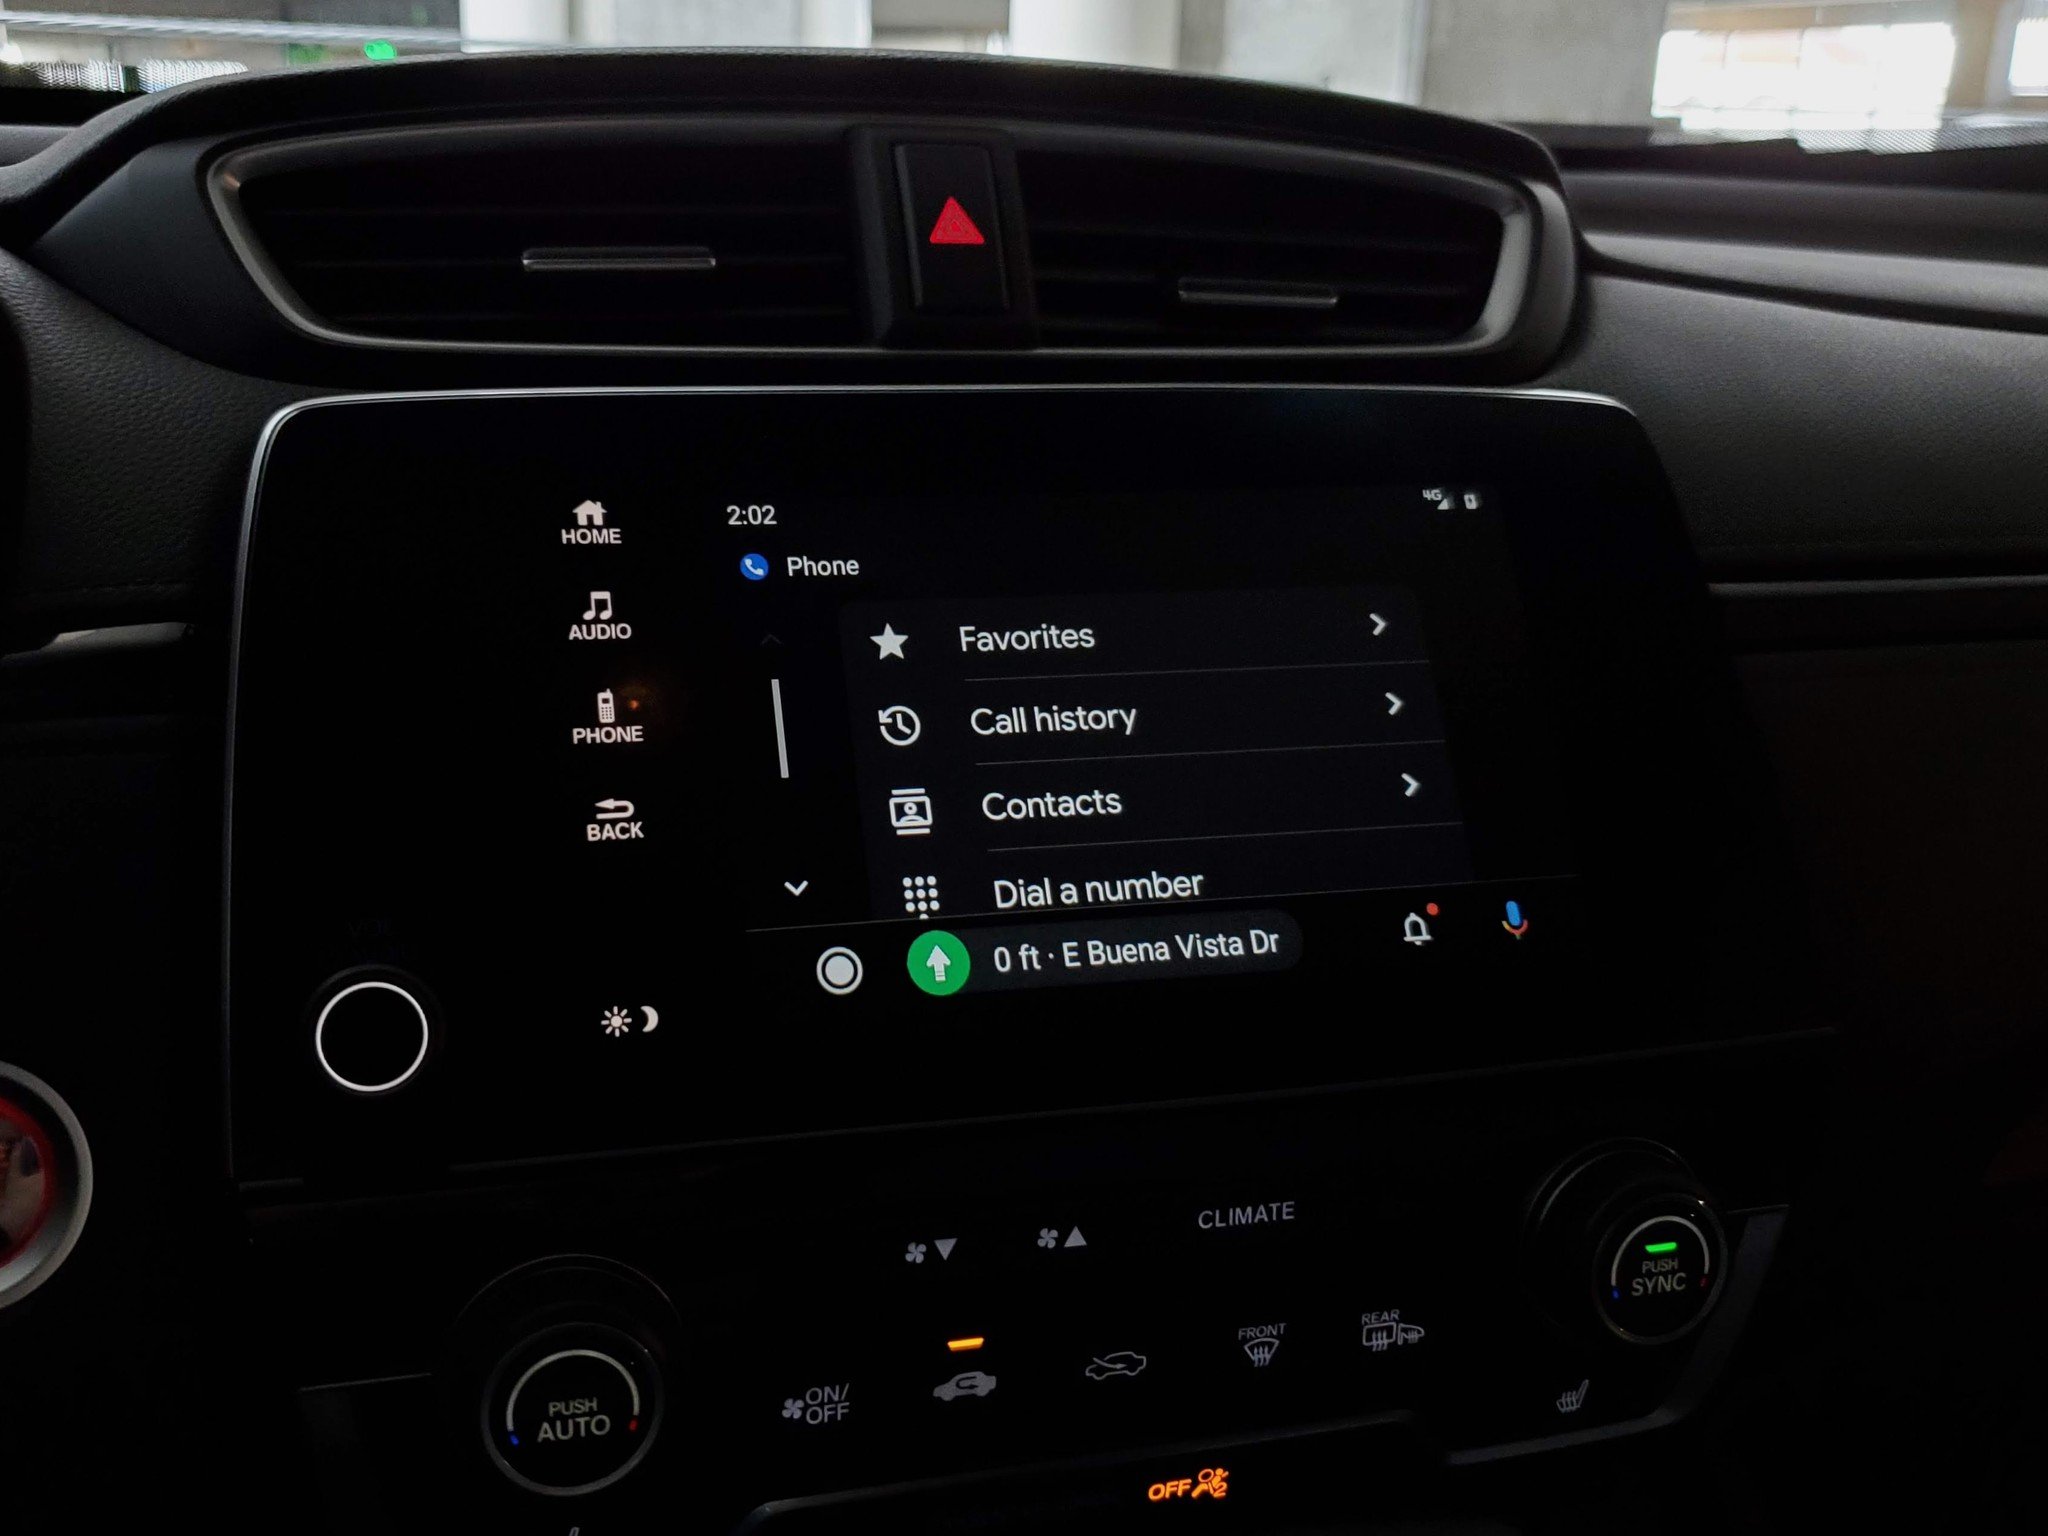 new Android Auto dialer app